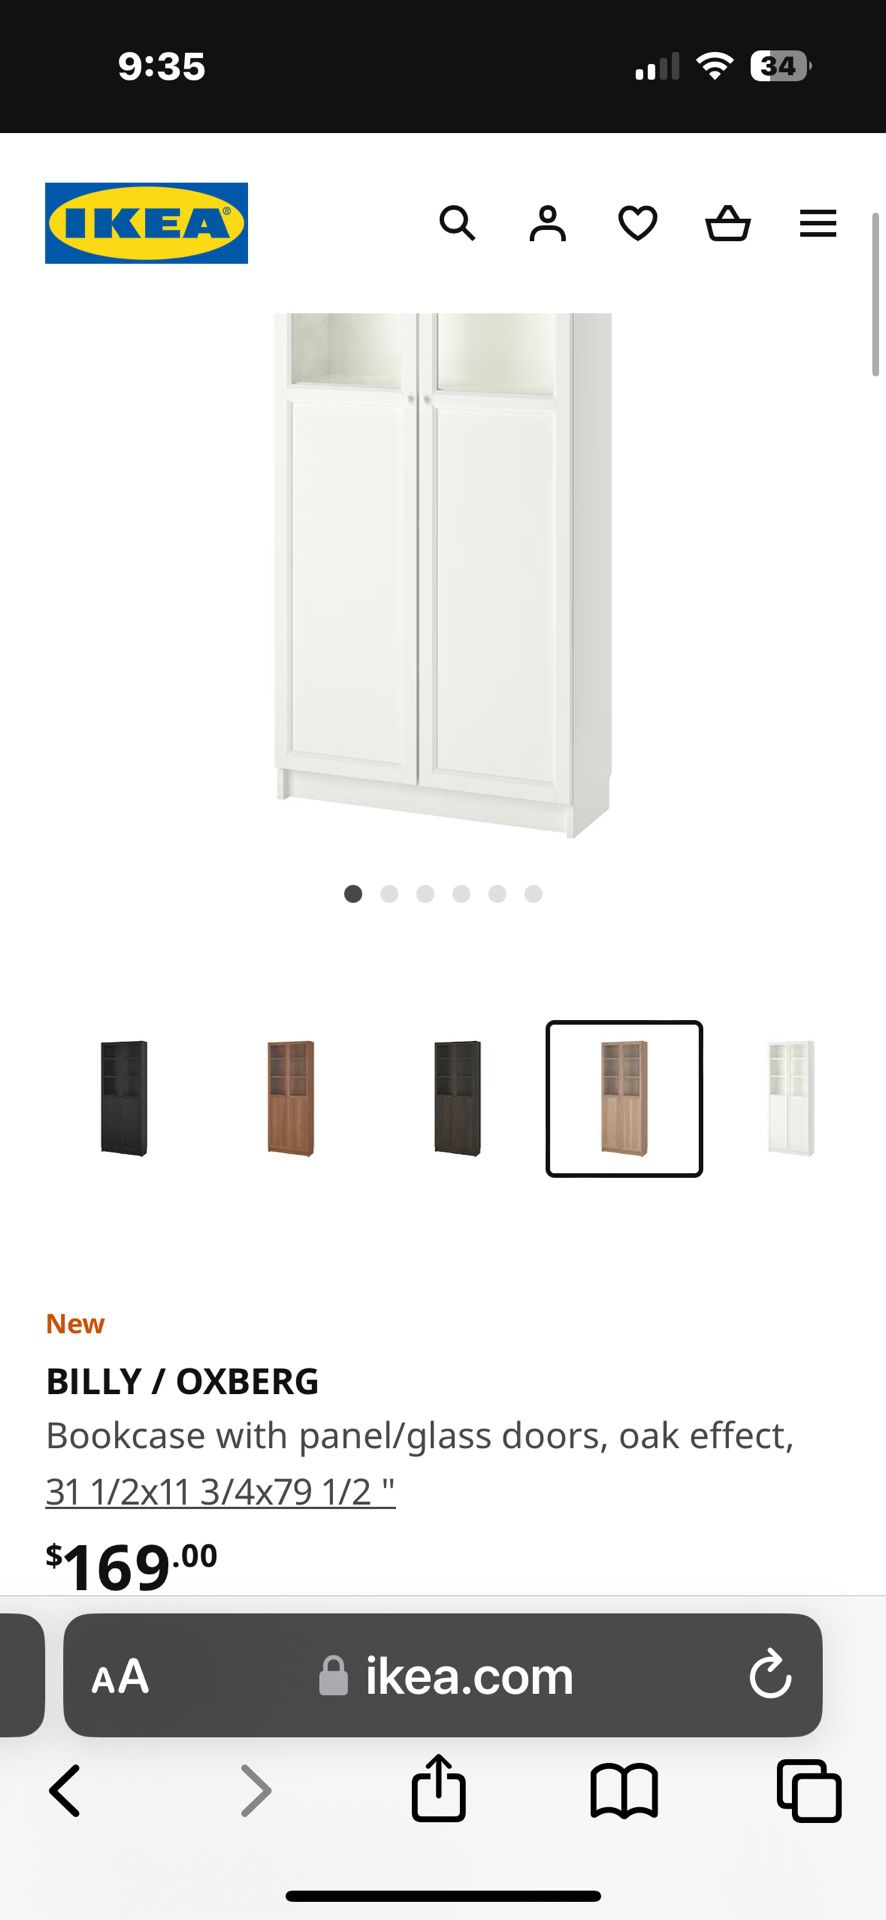 IKEA - BILLY / OXBERG Bookcase with panel/glass doors